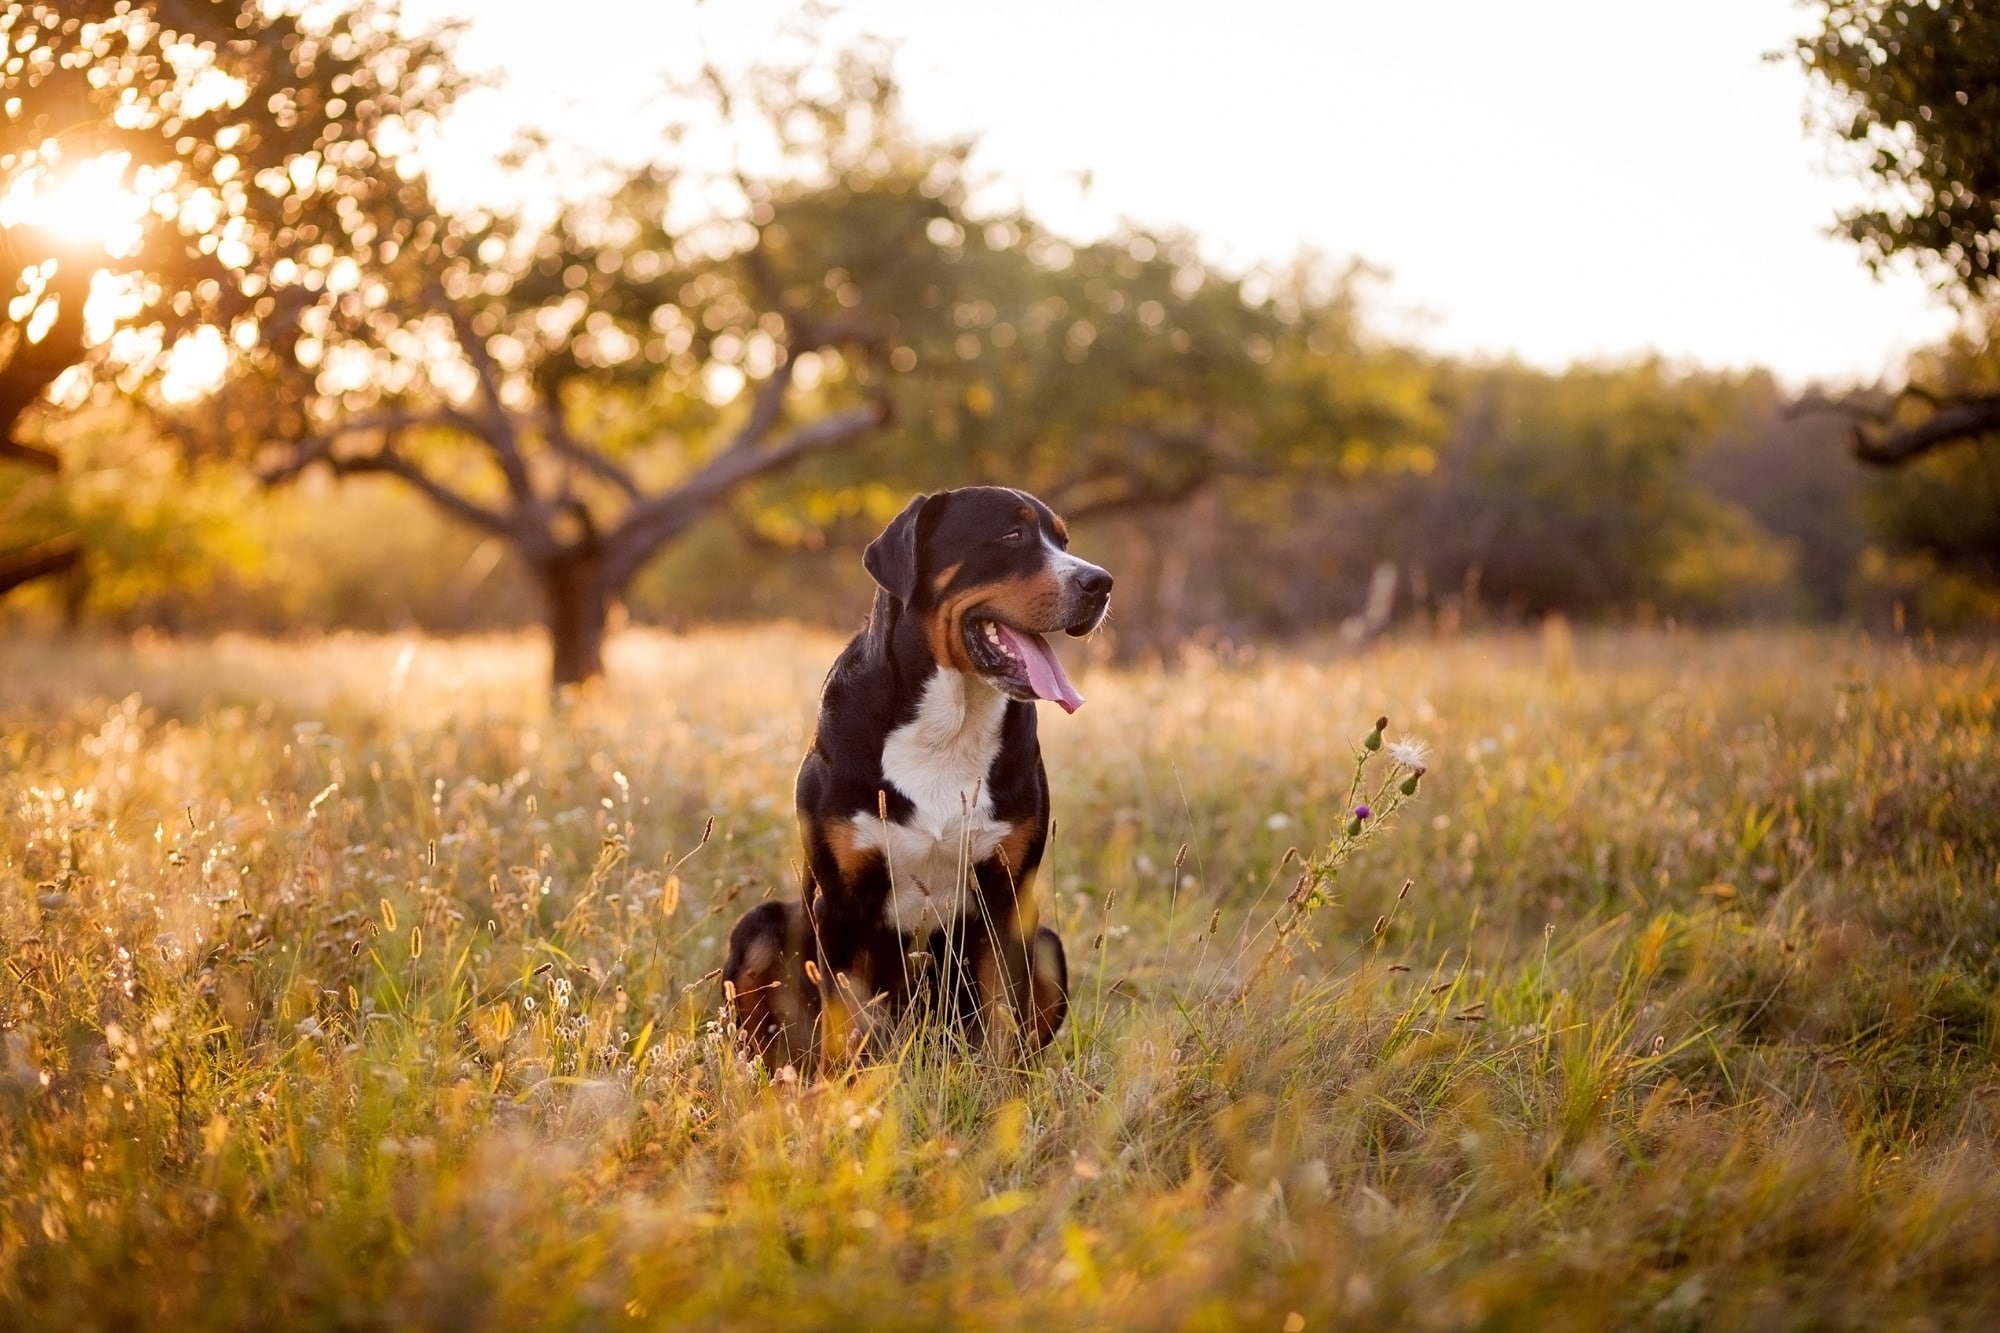 The great swiss mountain dog sitting in the grass and breathes with his tongue hanging out in sunset. The picture taken in summer in an old garden.